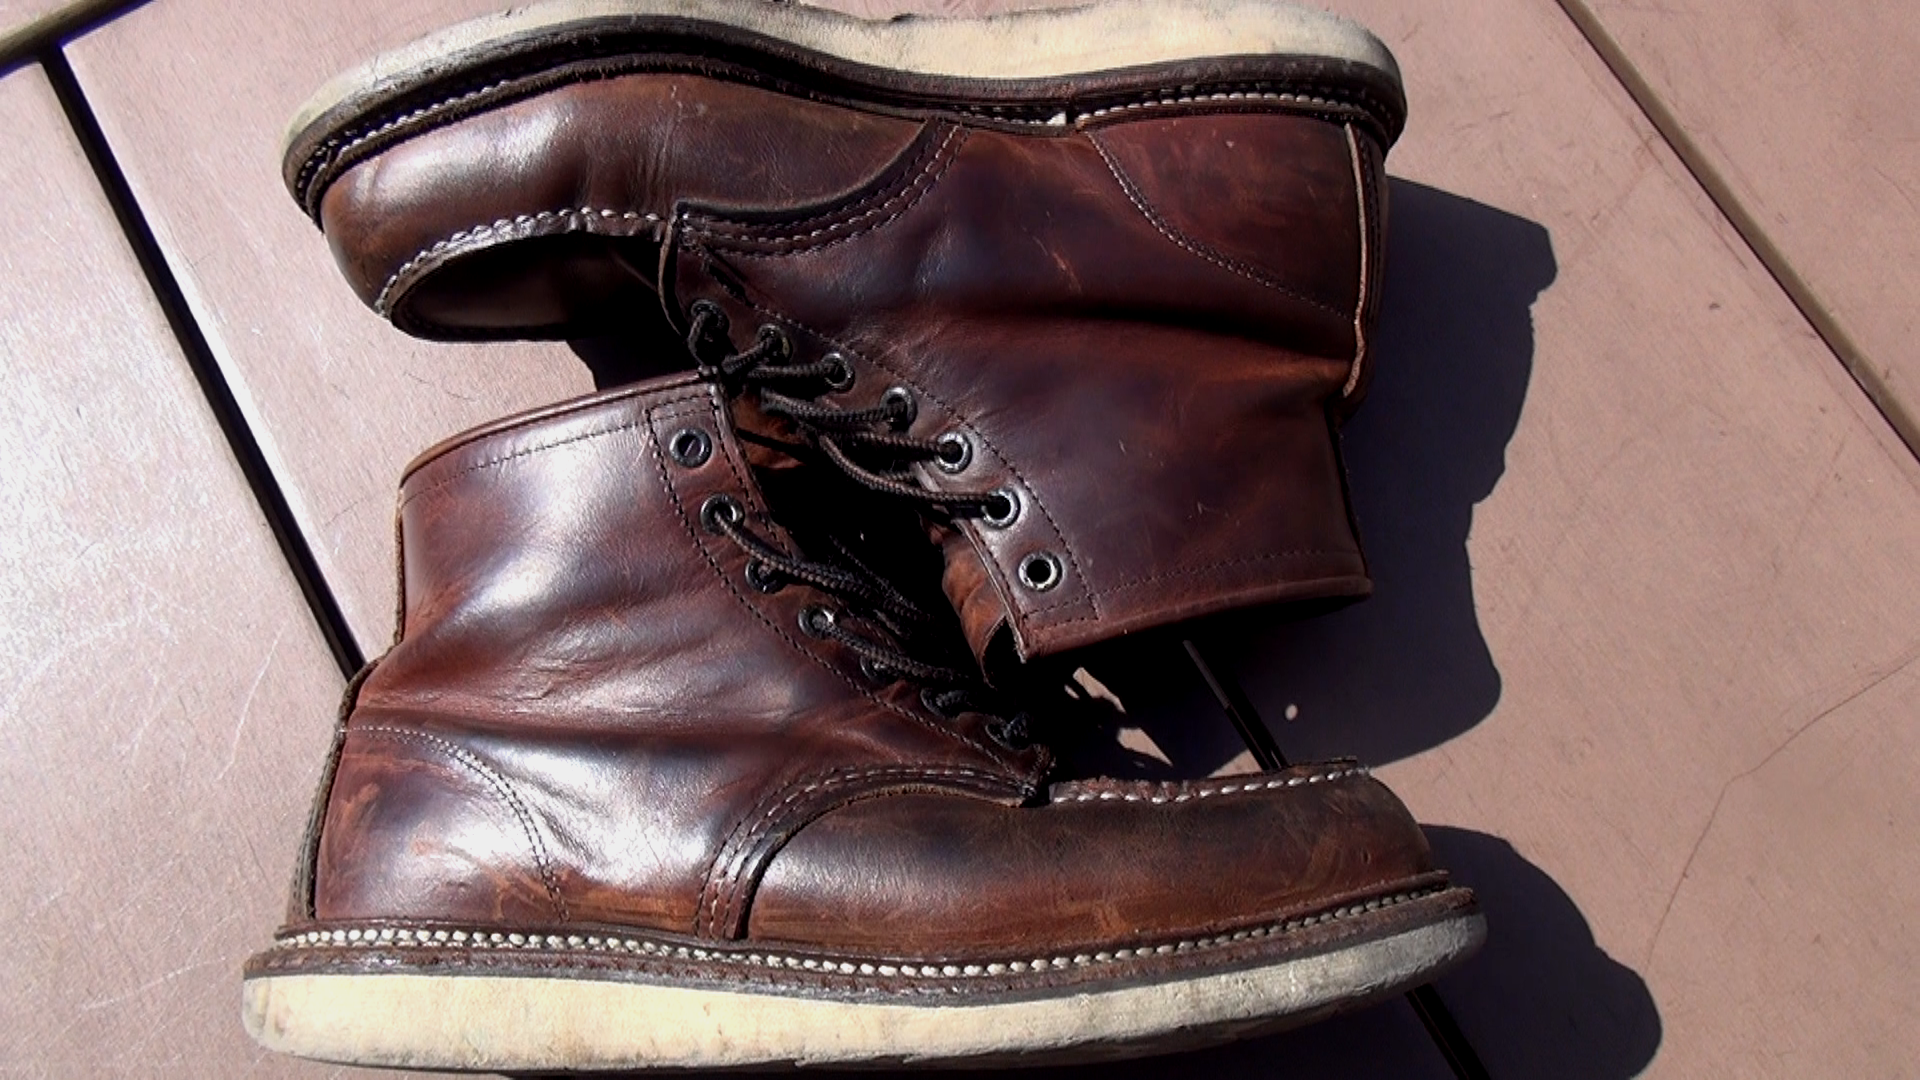 redwing1907 カッパーラフ＆タフ　経年変化　エイジング